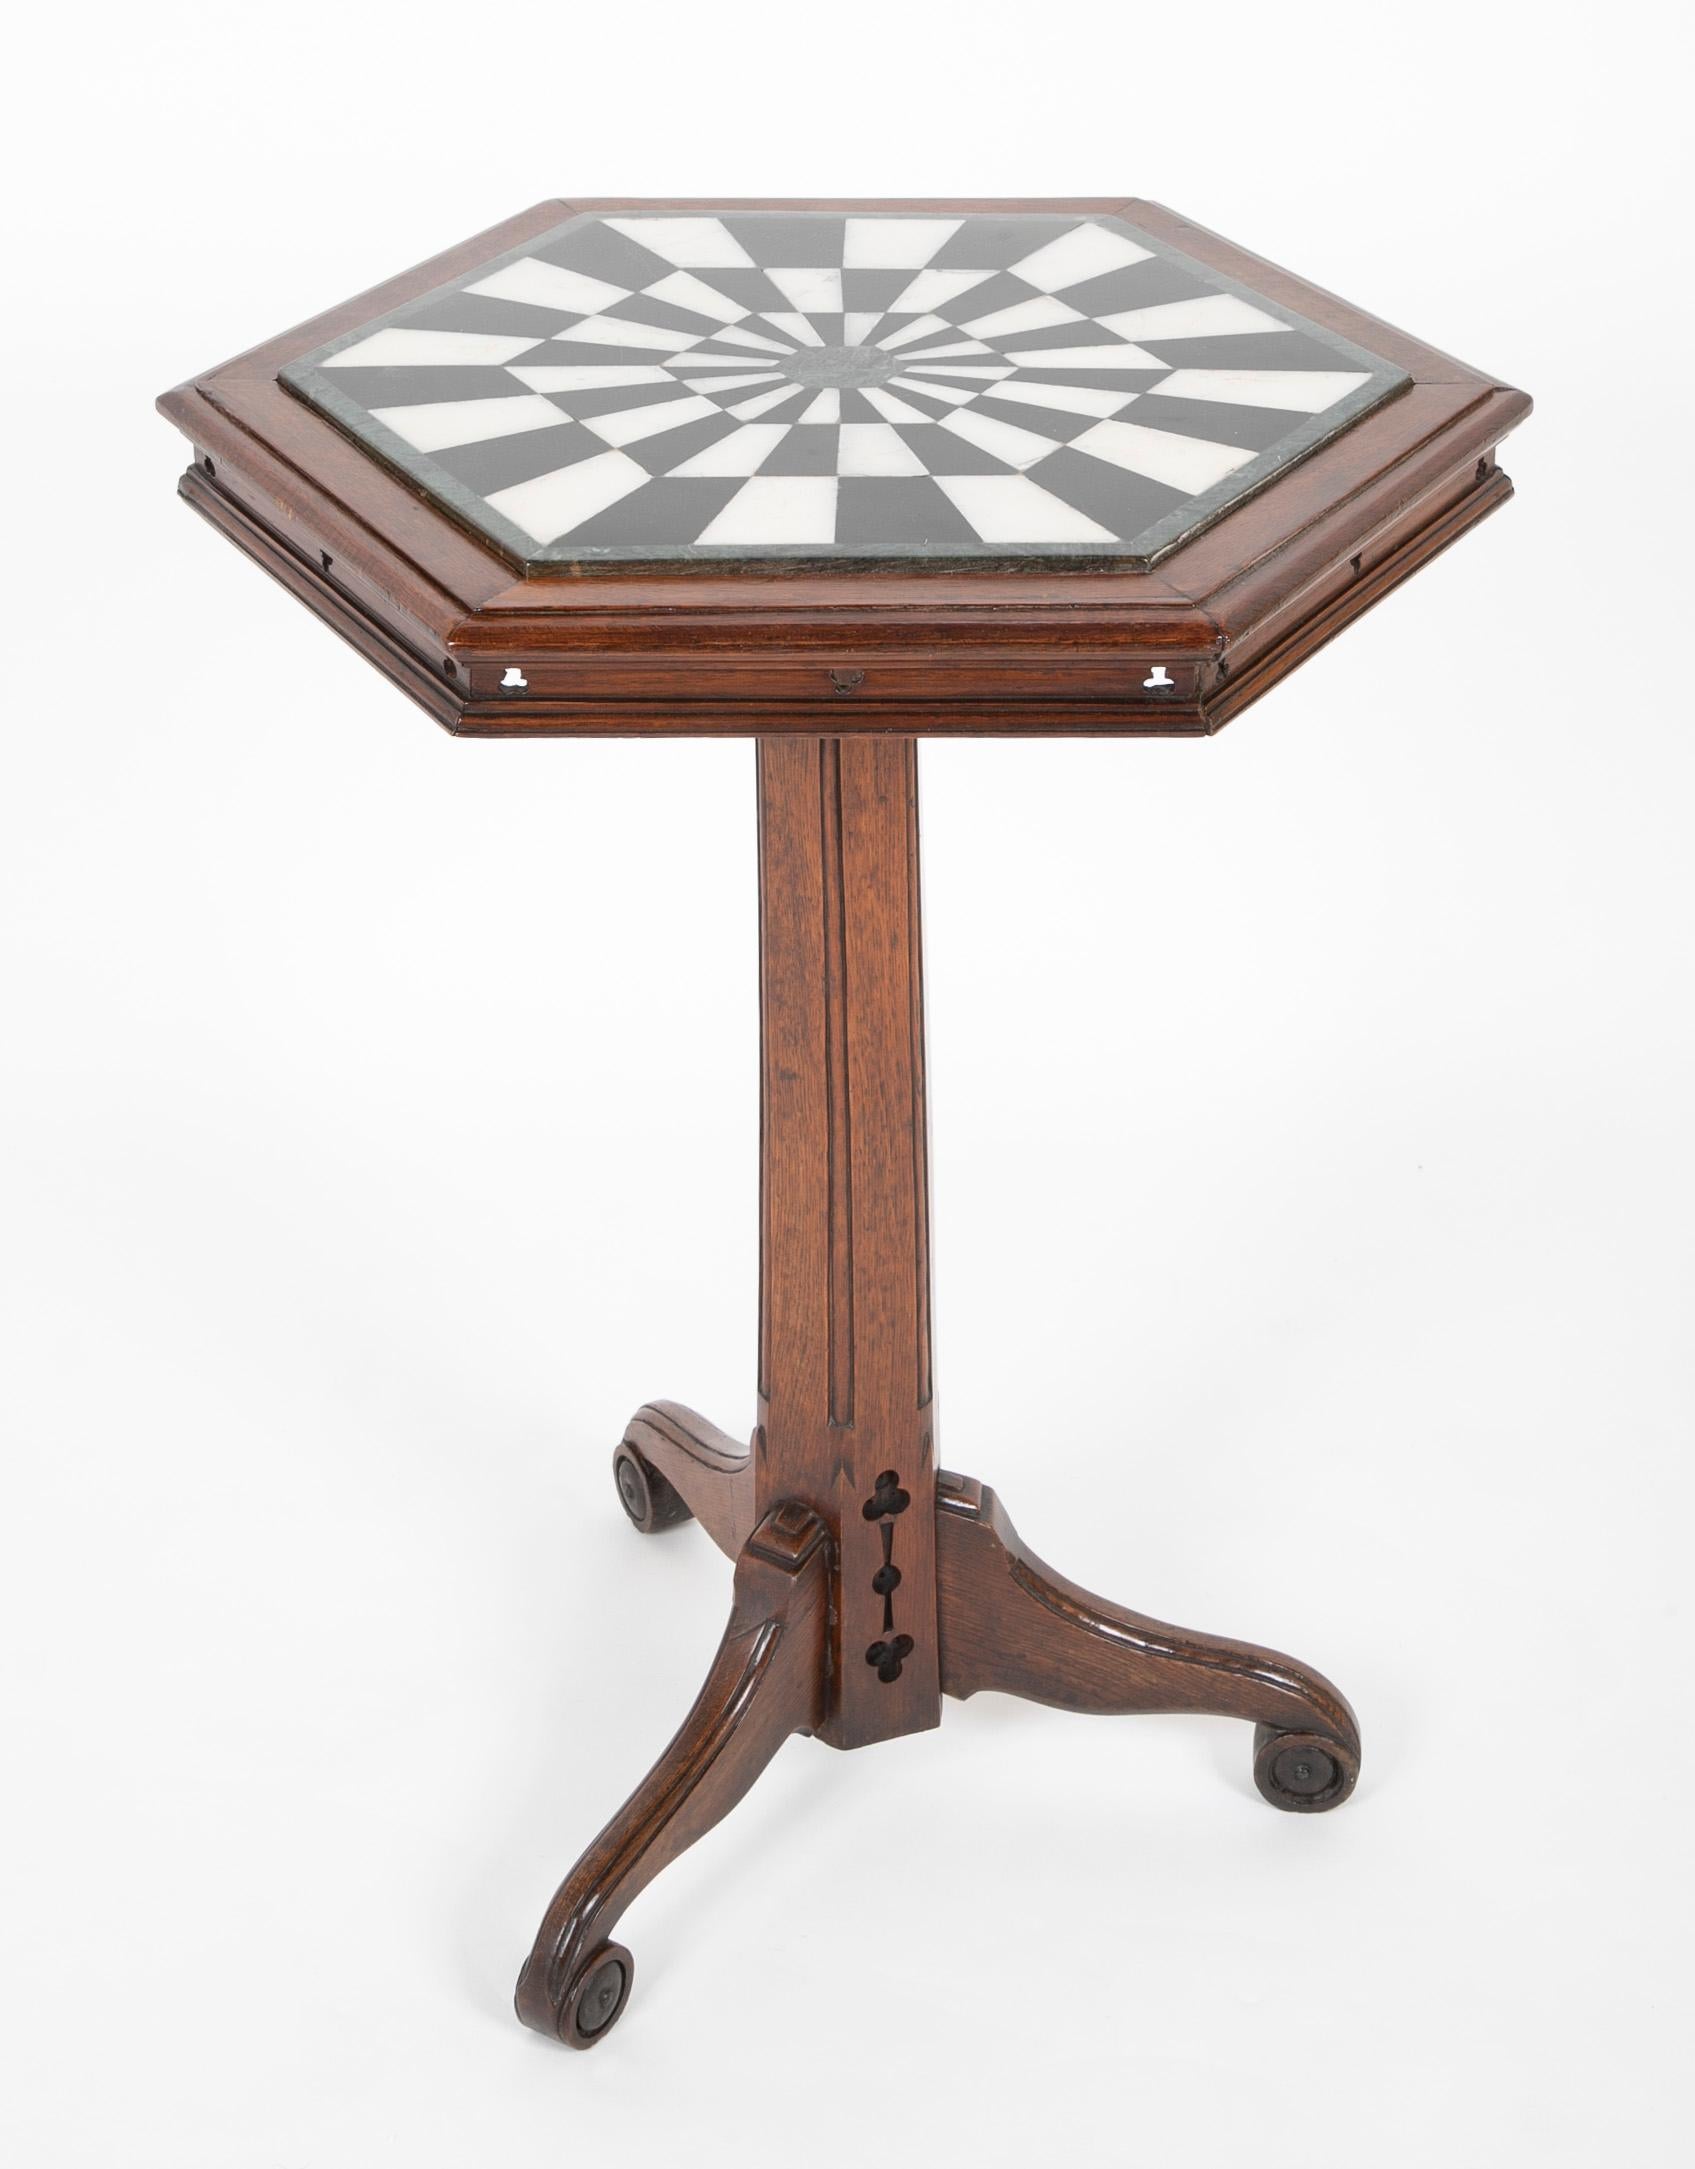 Mid 19th century English oak & marble top occasional table having black and white marble in dart board type design.